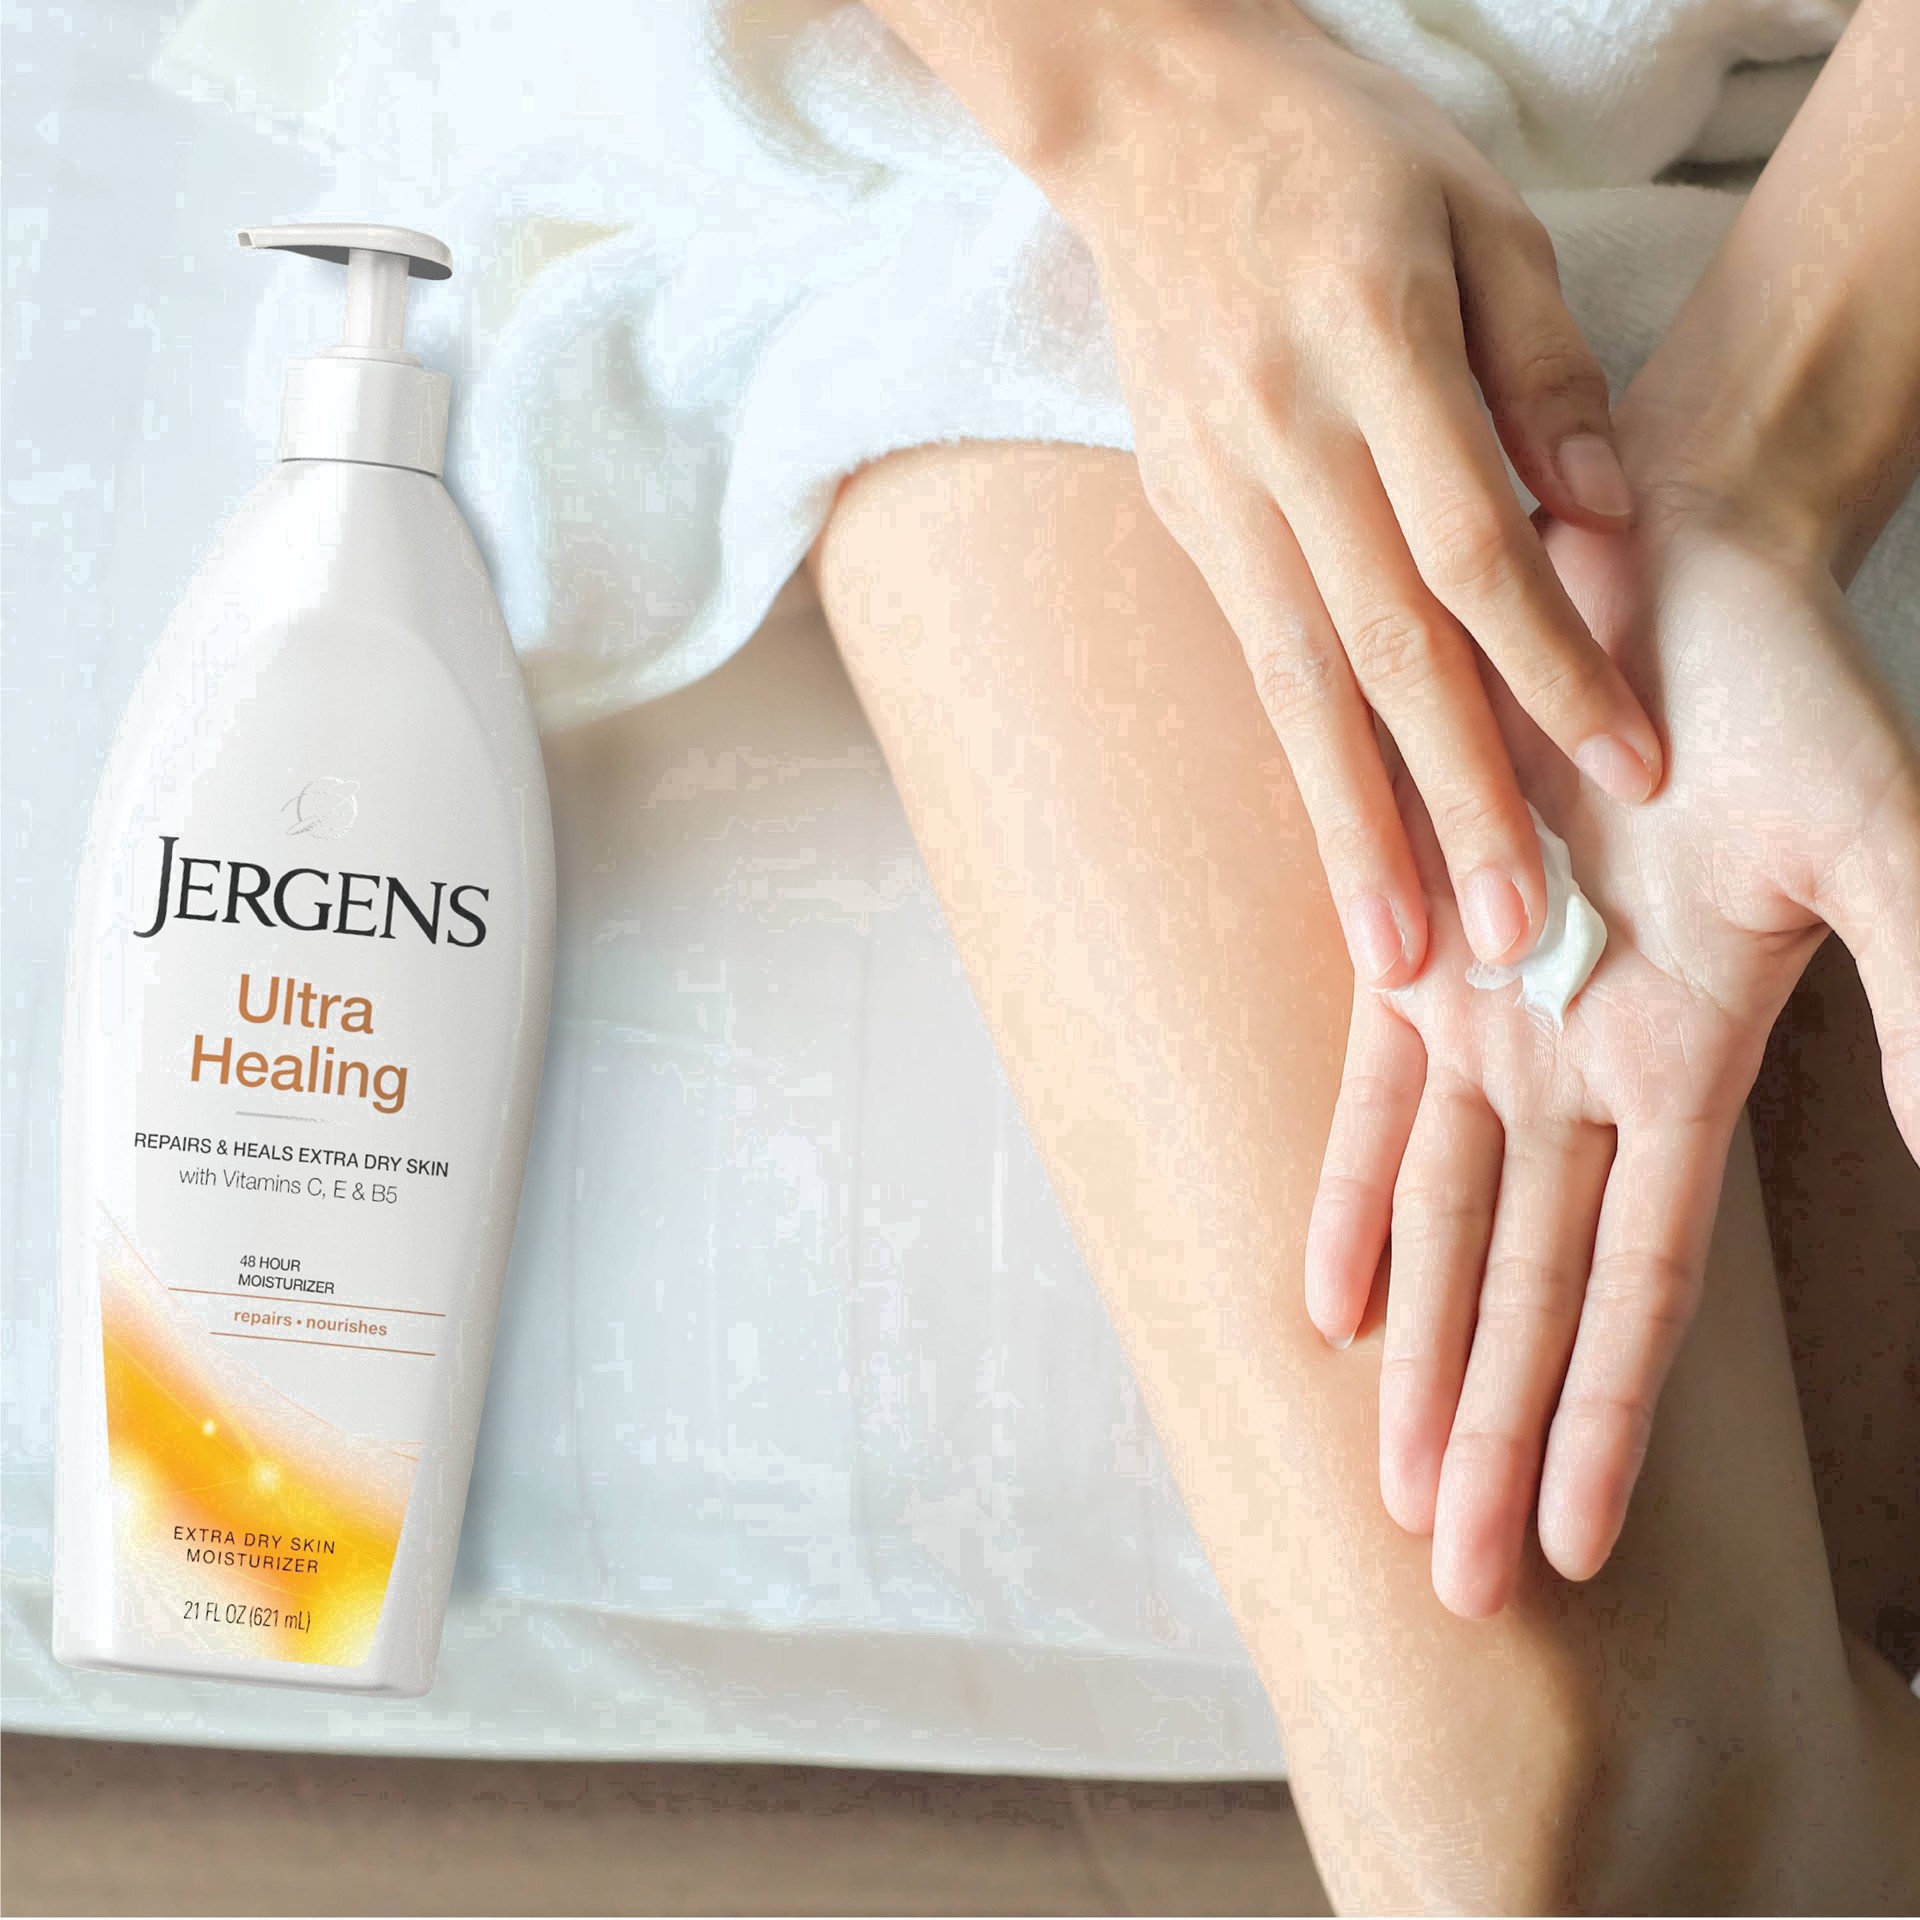 slide 8 of 67, Jergens Hand and Body Lotion, Dry Skin Moisturizer with Vitamins C,E, and B5, 21 fl oz